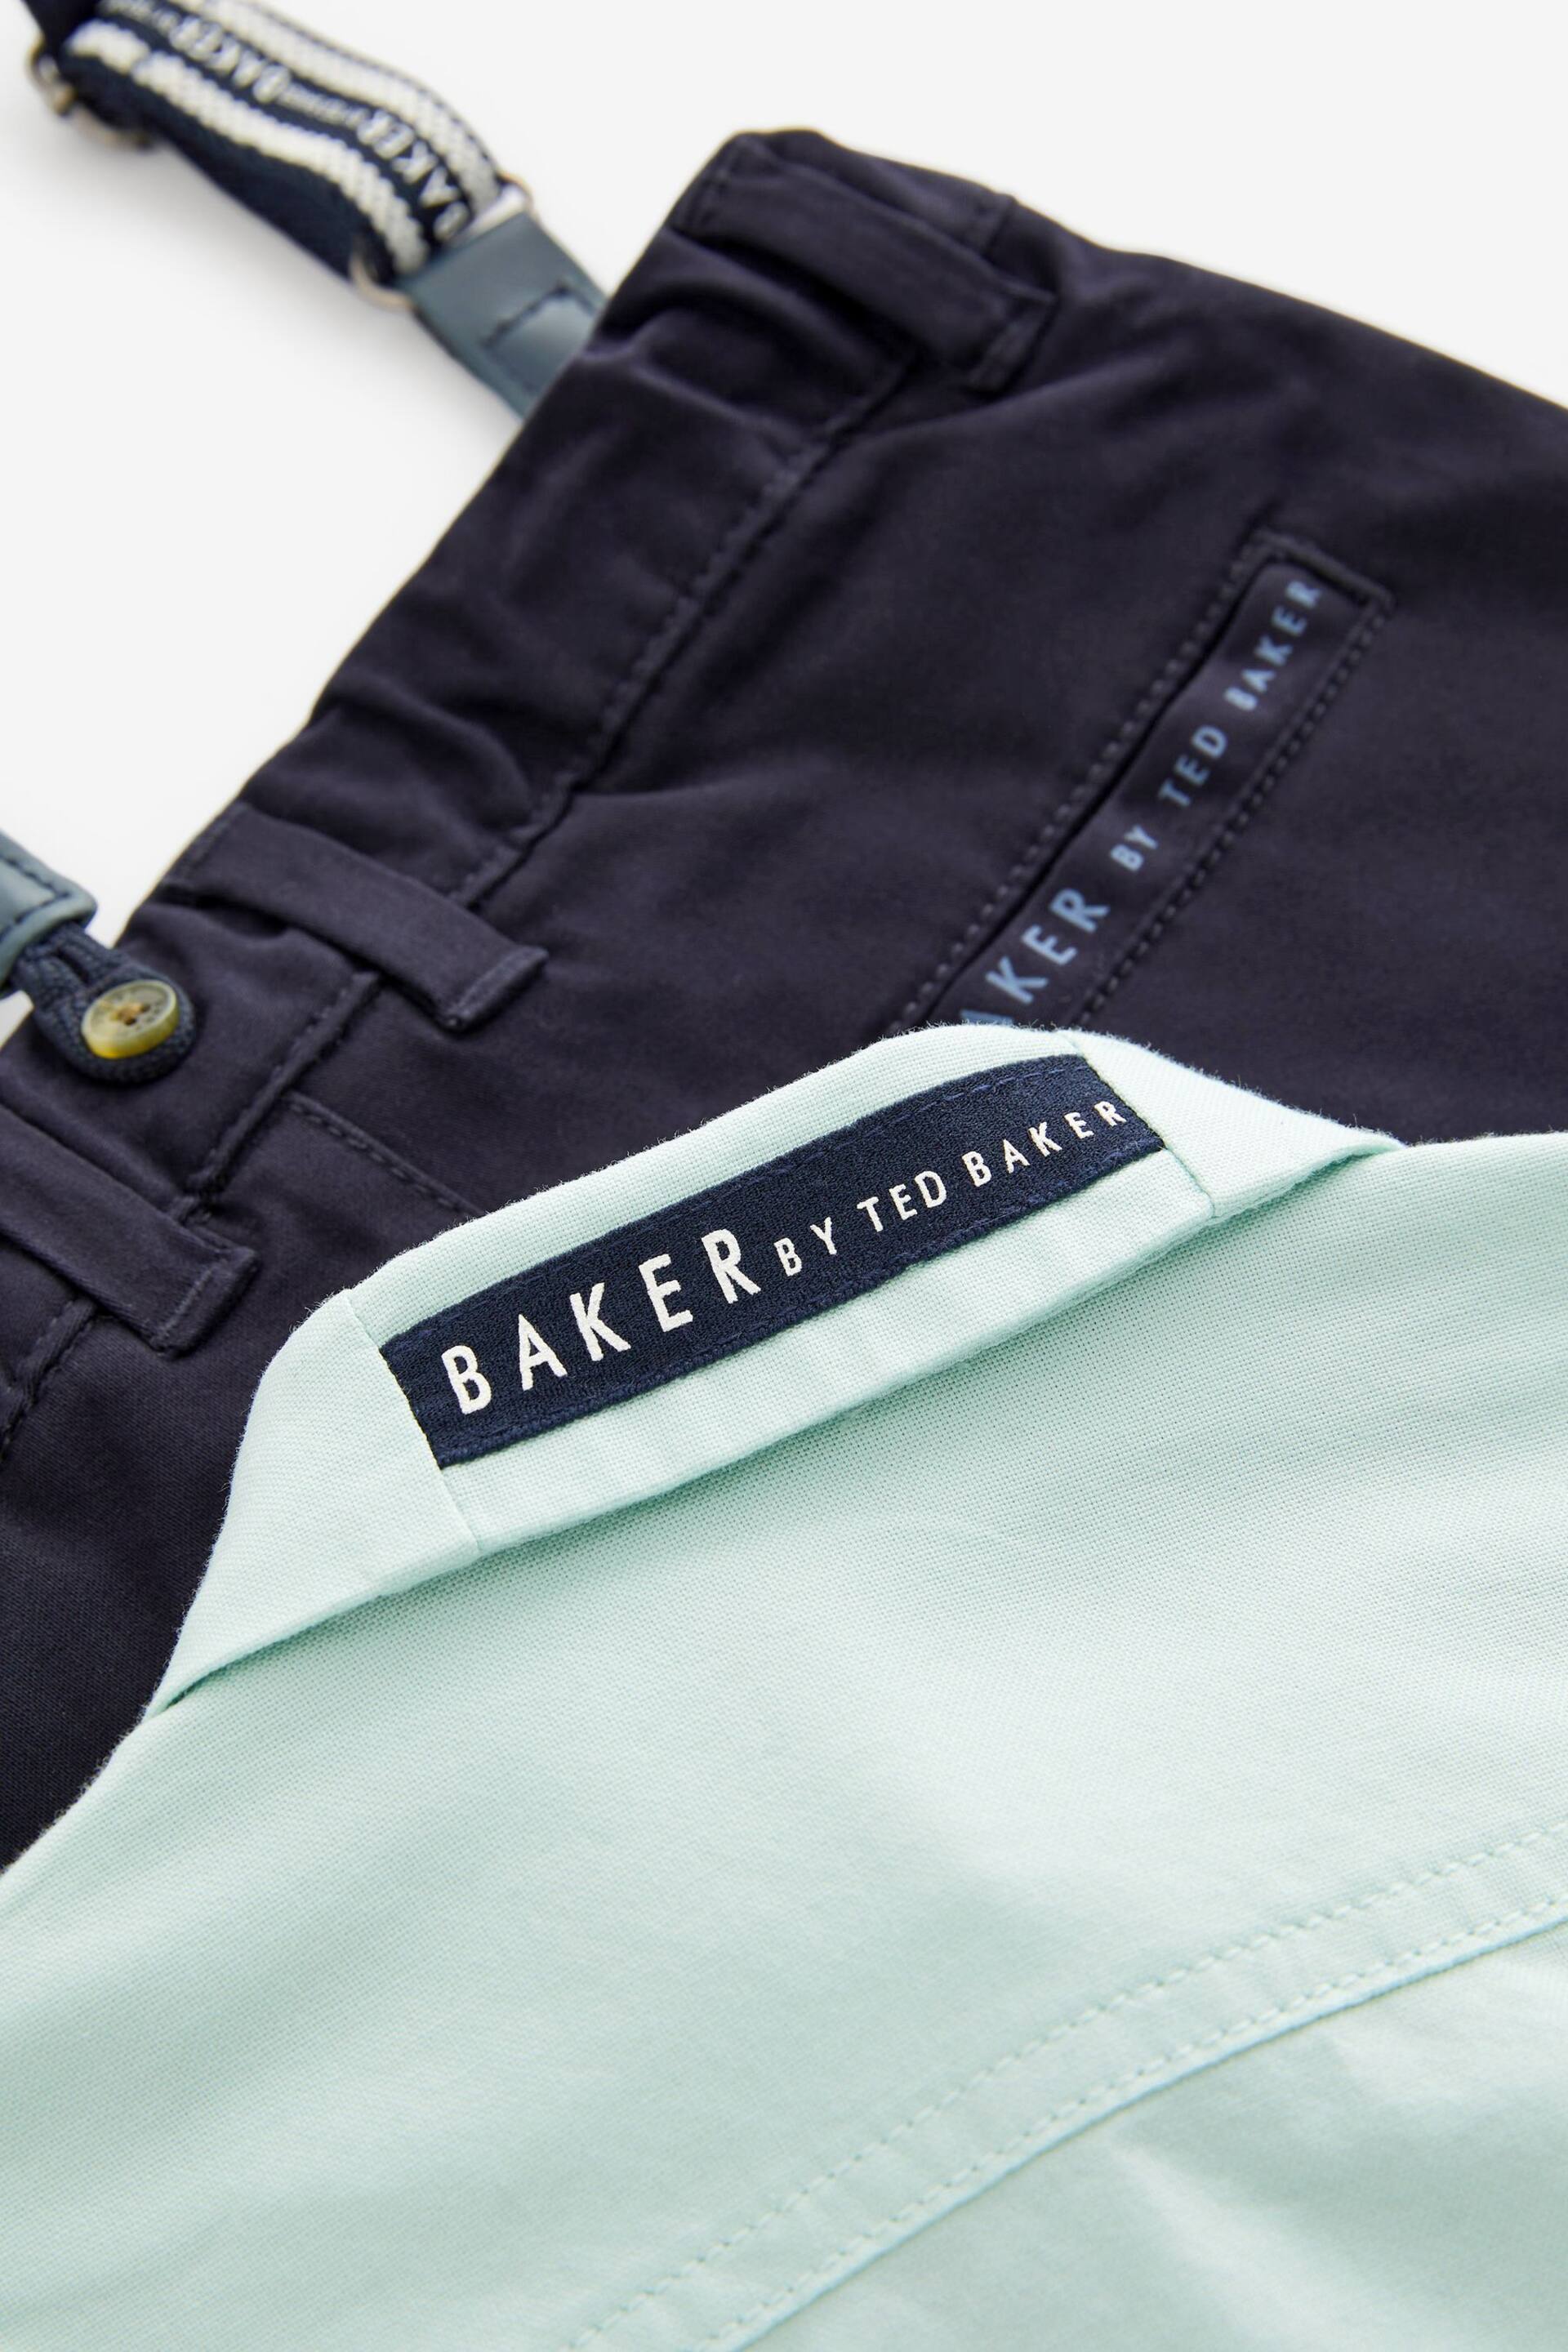 Baker by Ted Baker Shirt and Trousers Set - Image 11 of 11